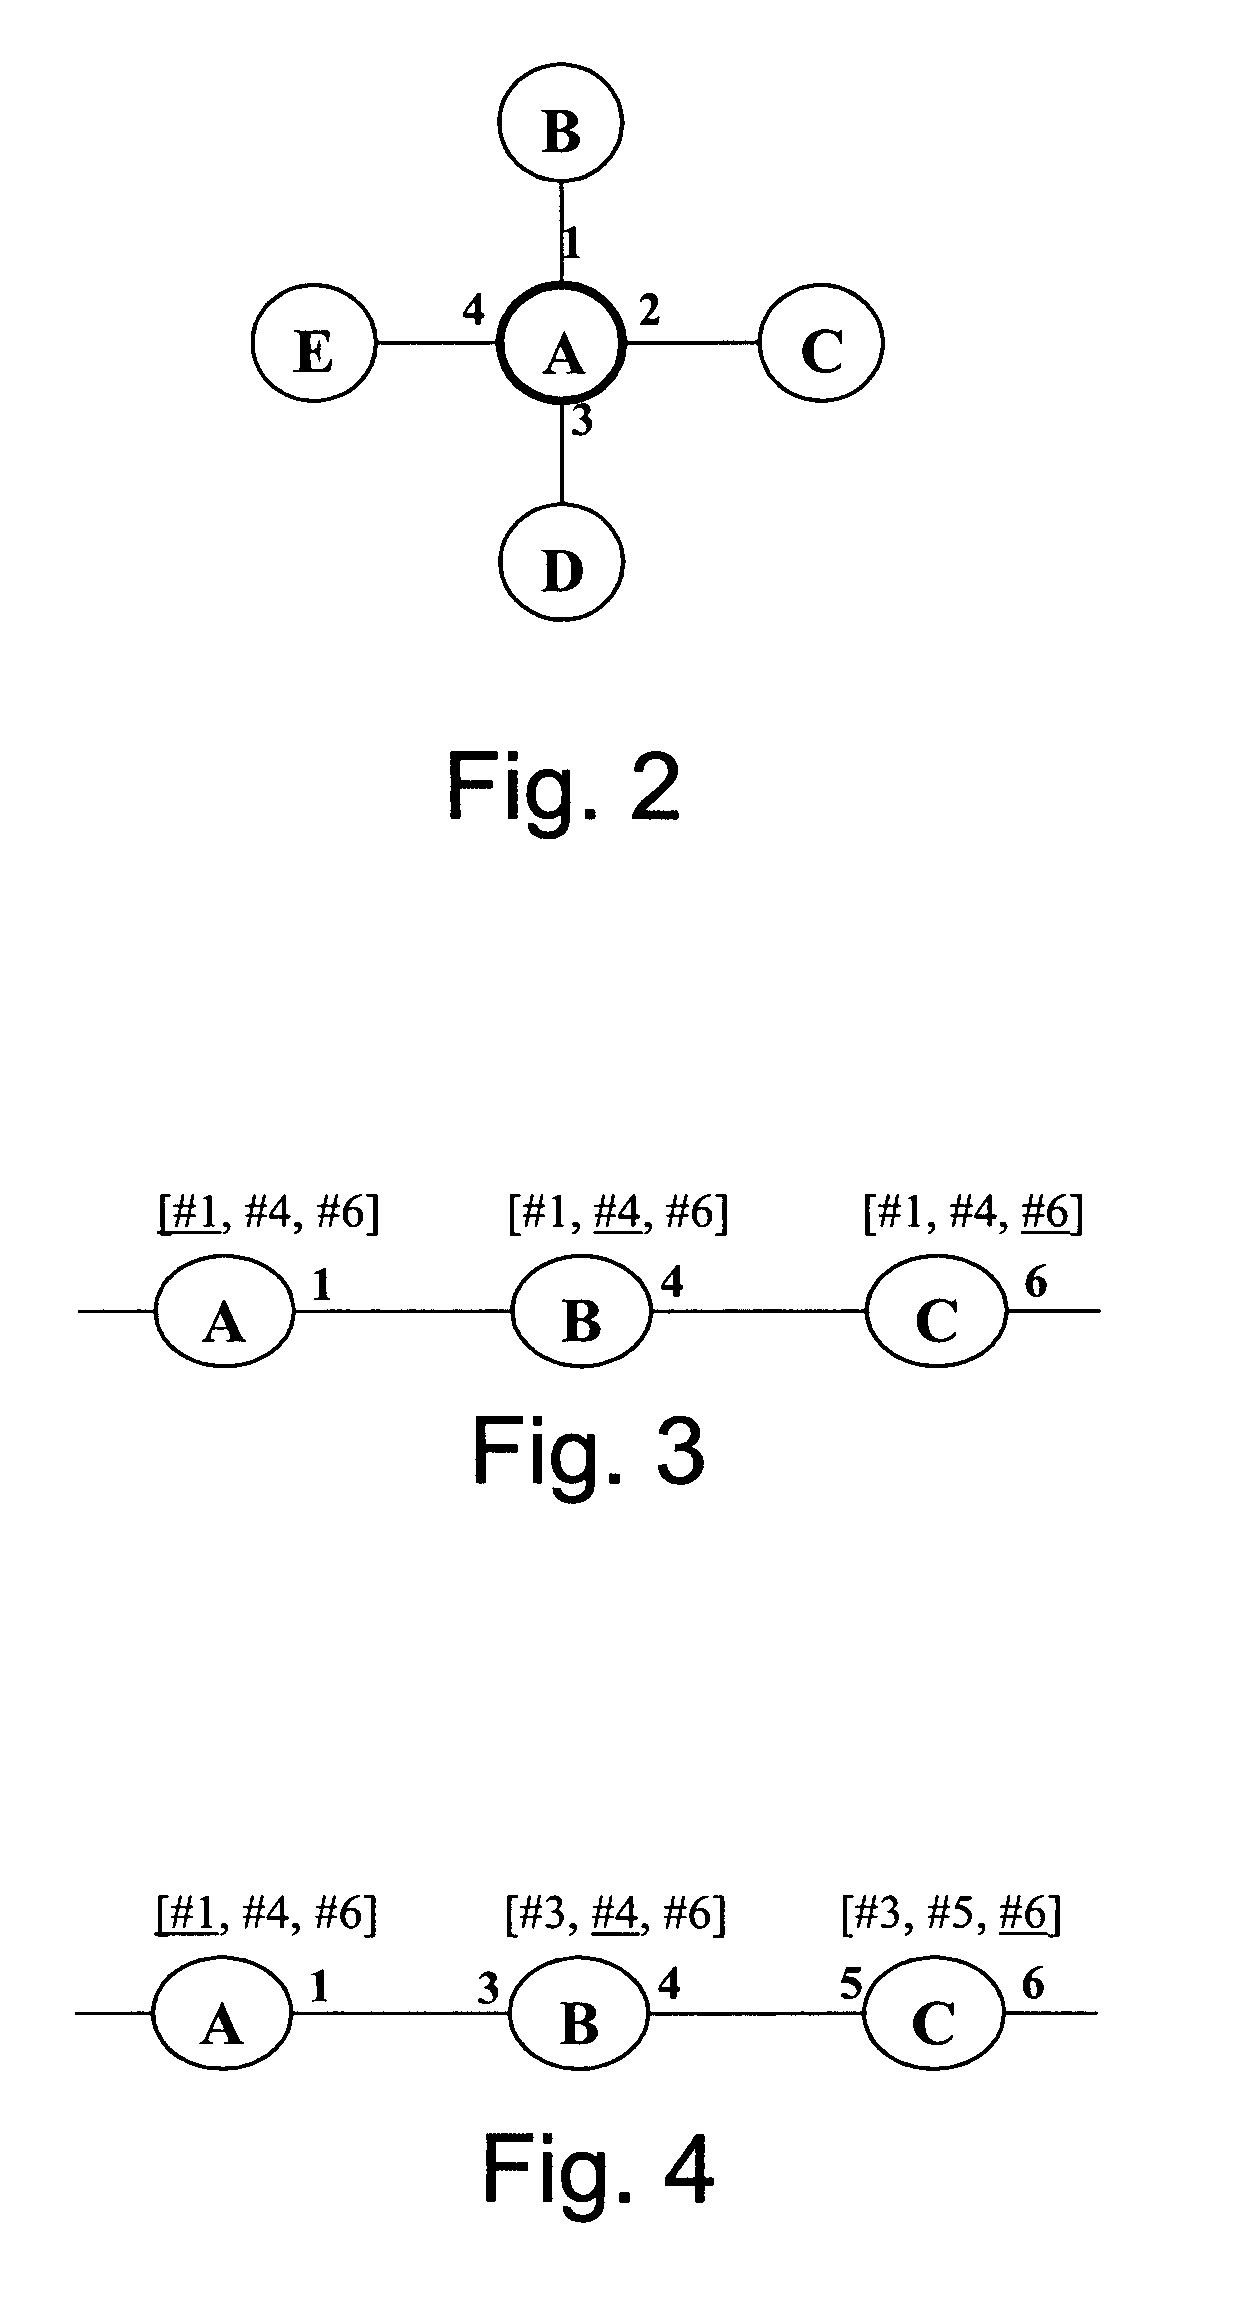 Routing of protocol data units within a communication network